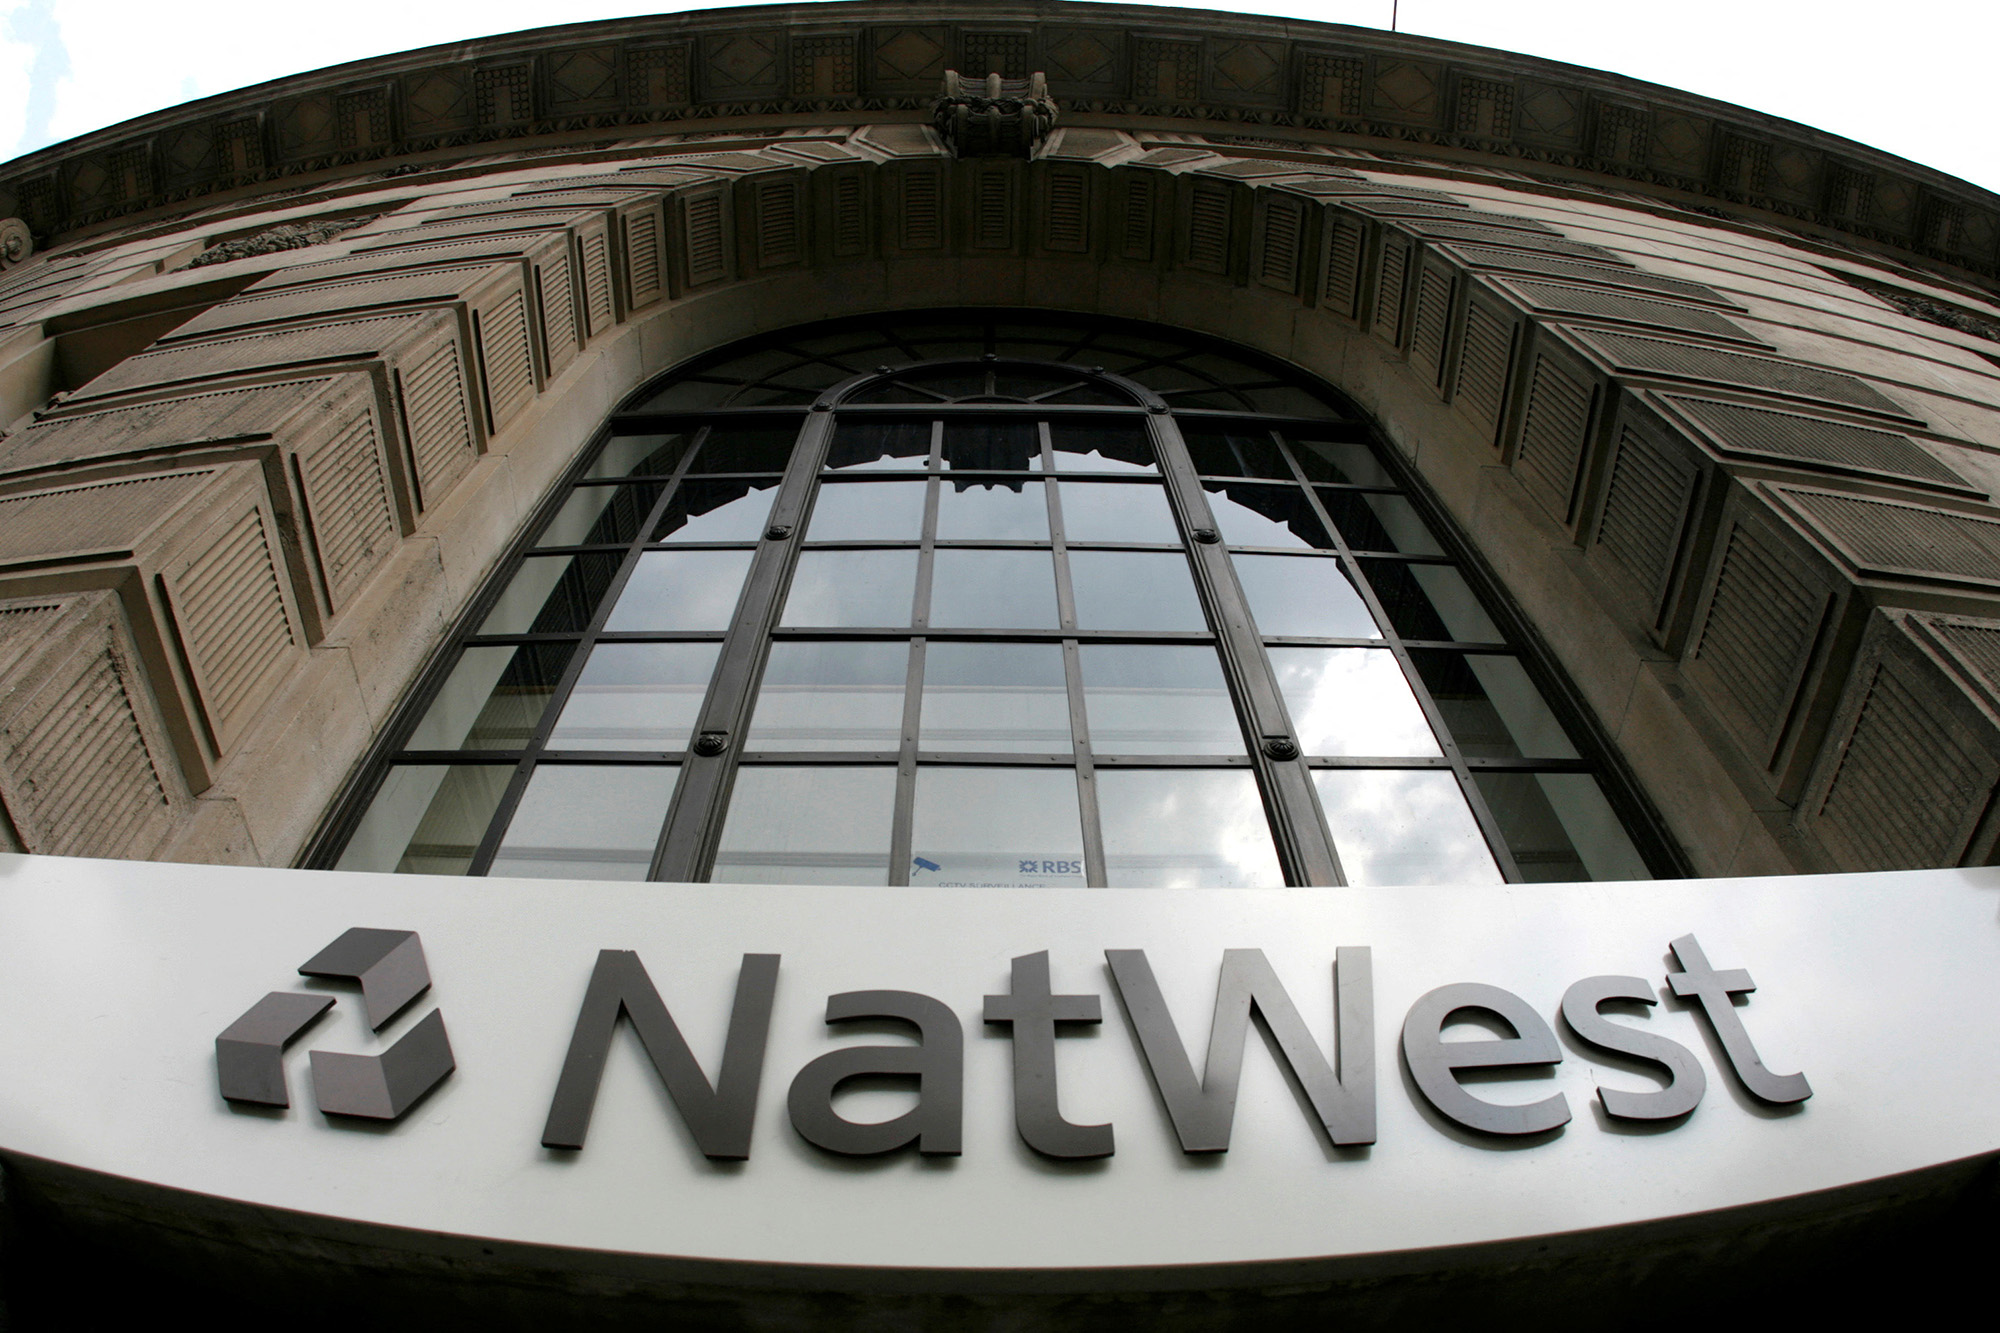 A NatWest sign at brick office building